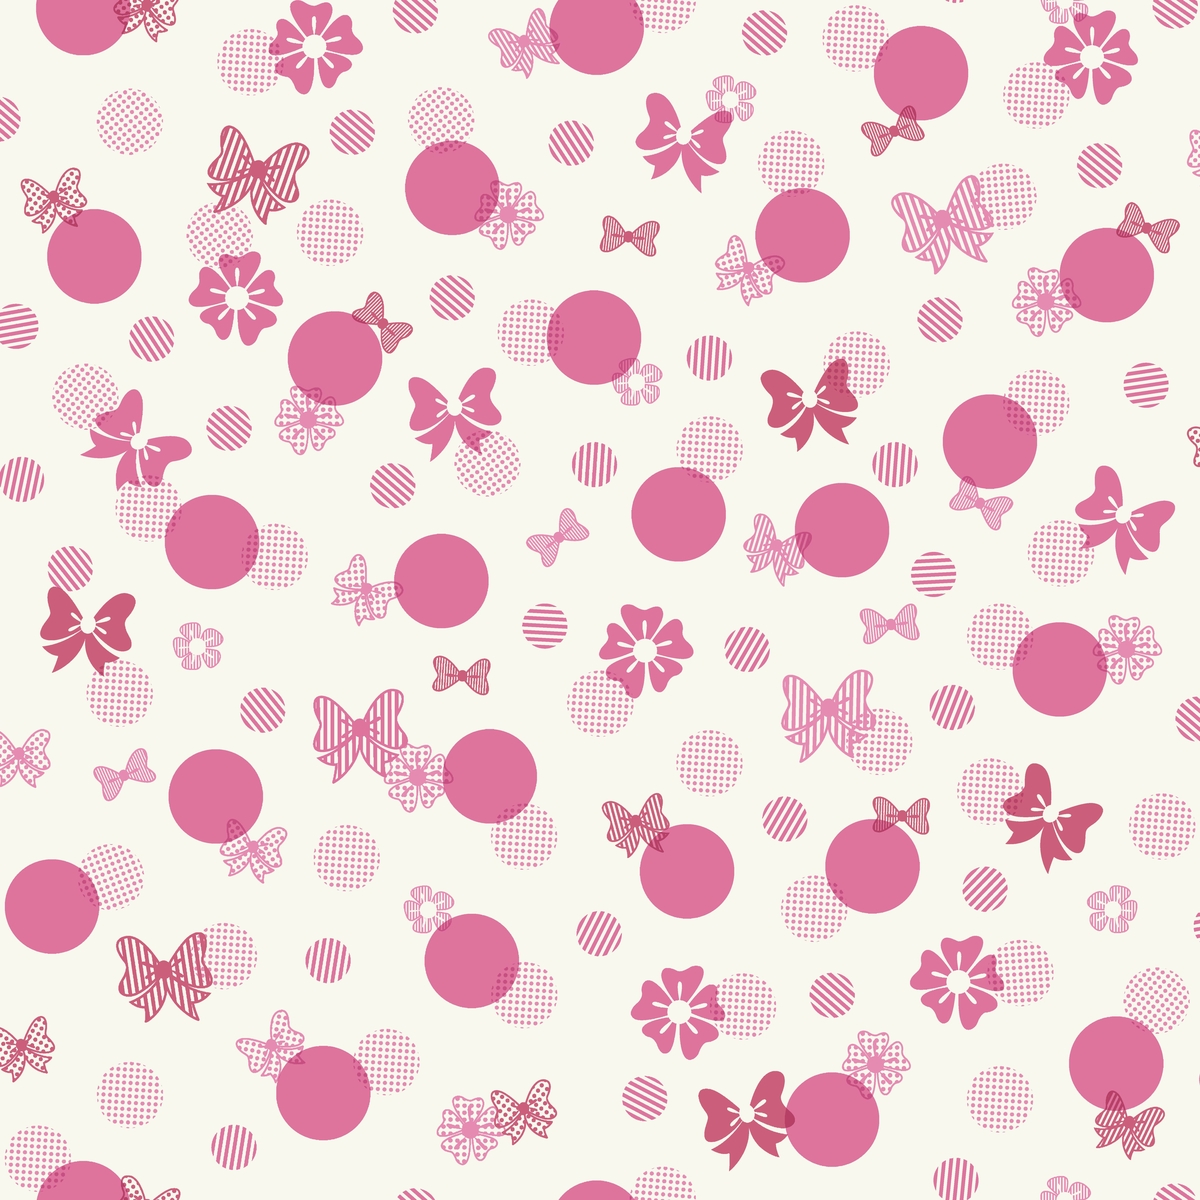 Minnie Mouse Dots Wallpapers